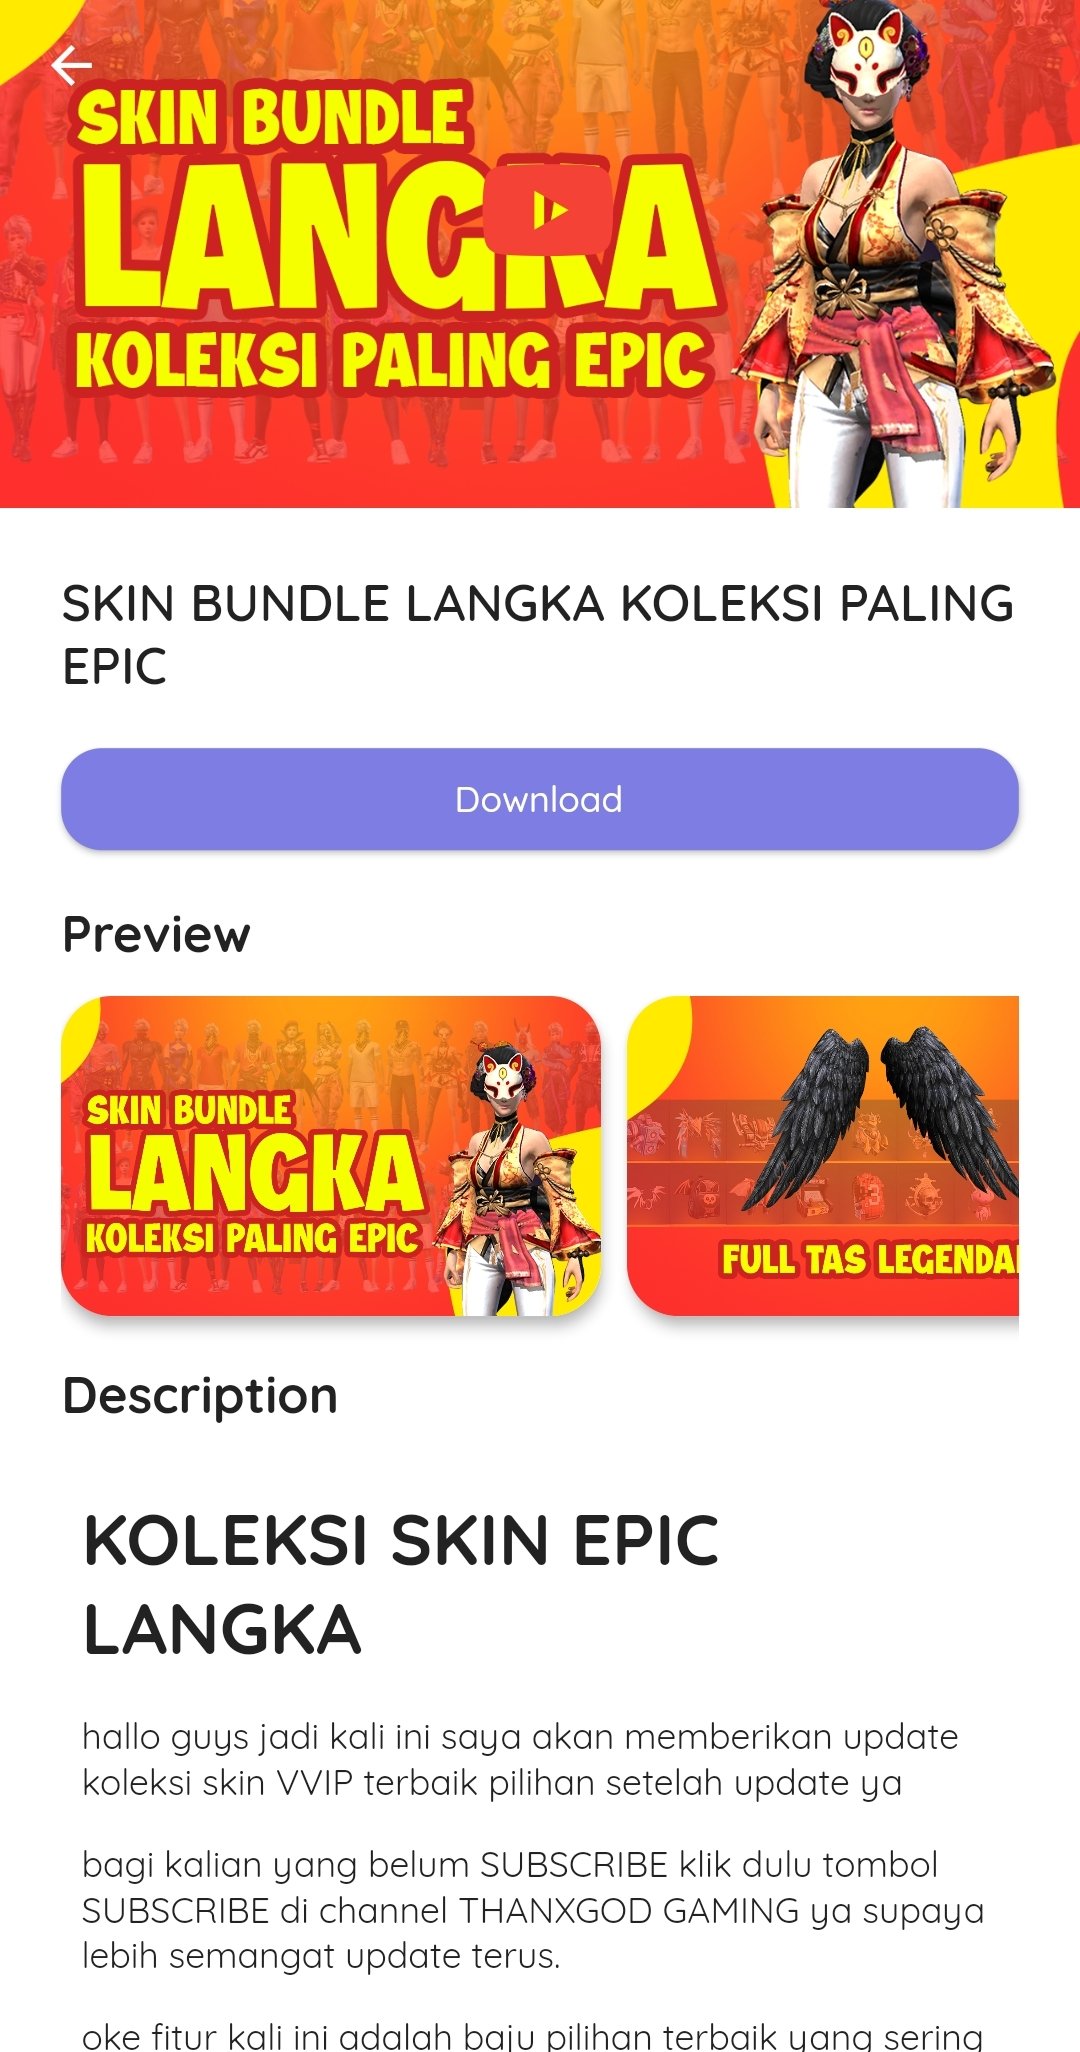 Skin Tools Pro Para Iphone / 60 Fps Booster Gfx Tool Pro For Free Fire Free For Android Apk ...